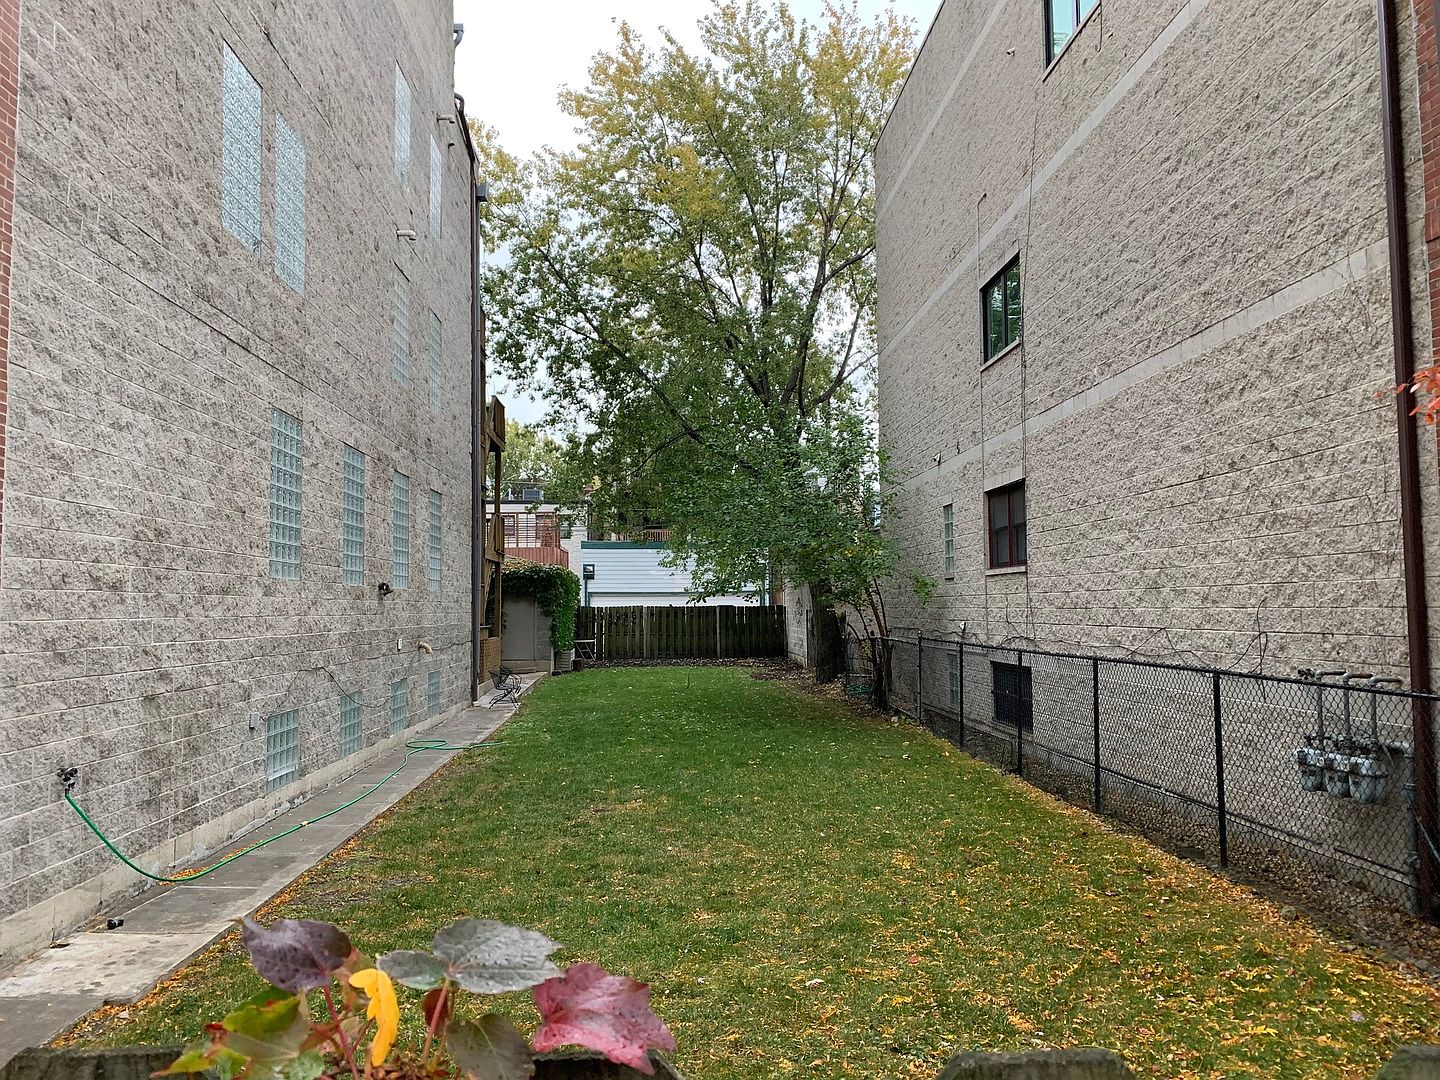 1631 N Oakley Ave, Chicago, IL 60647 | Zillow